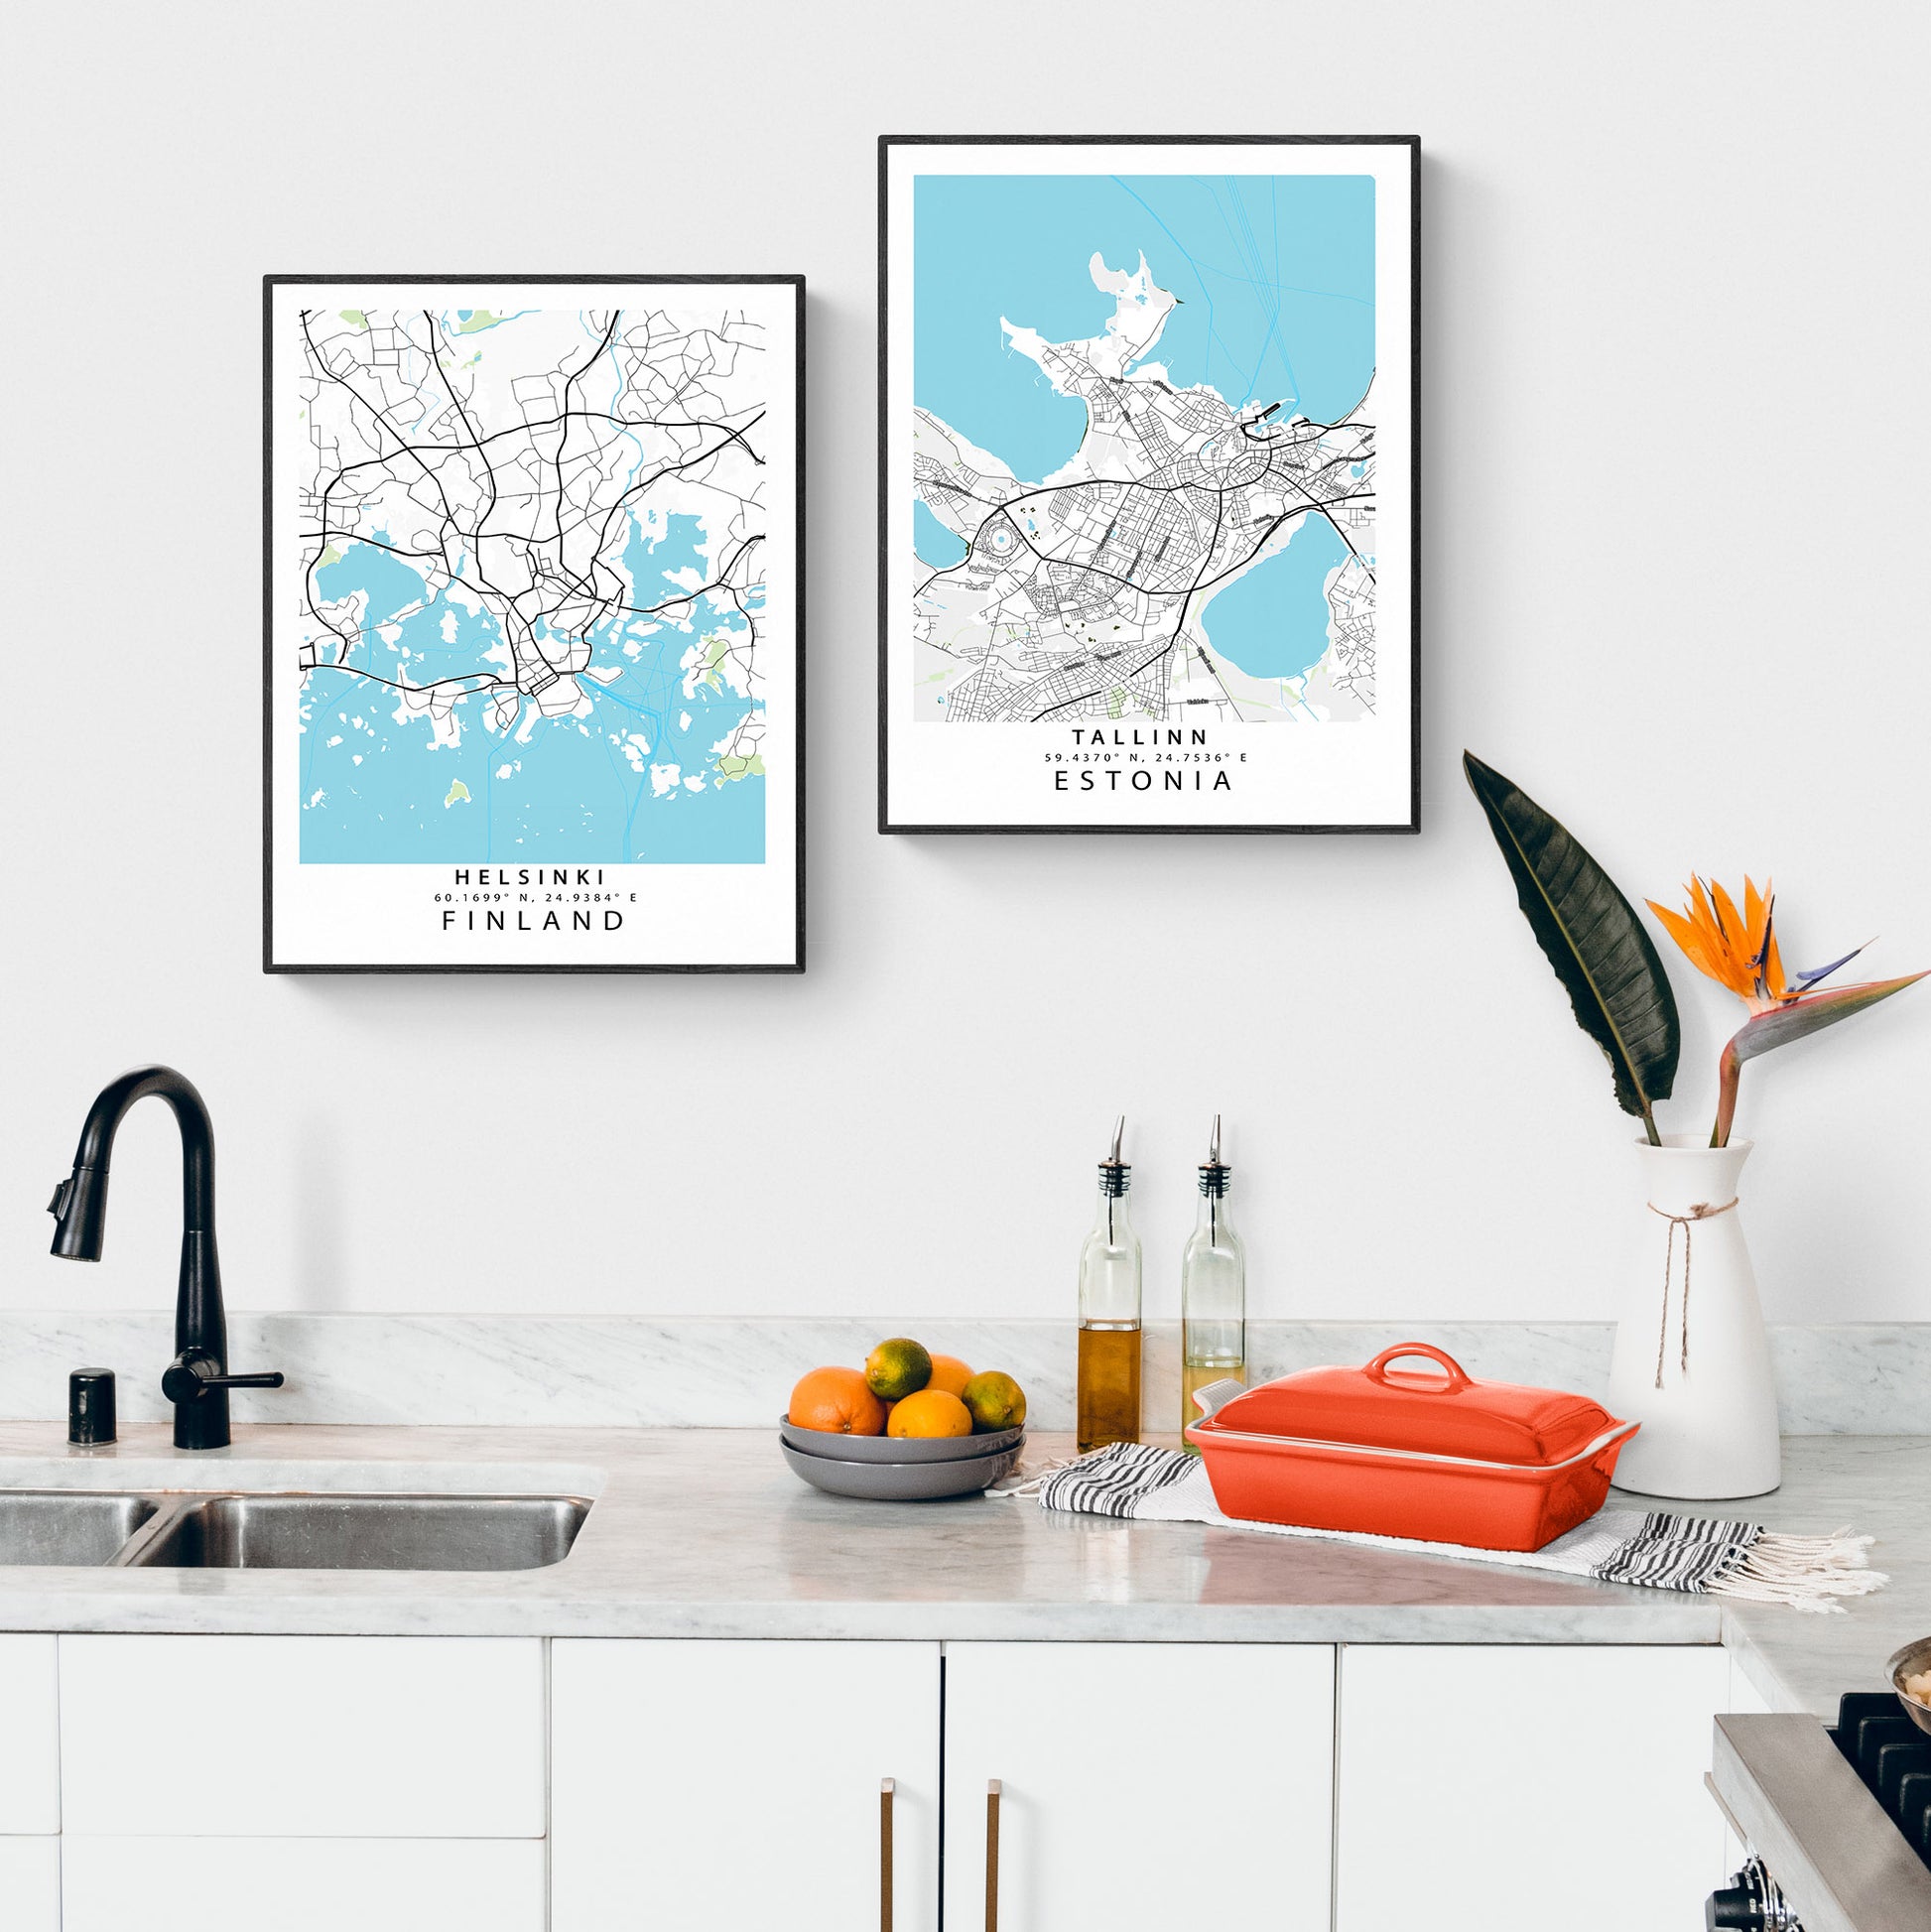 Print the coolest city around with our Helsinki Street Map Posters! These vibrant and detailed prints capture the key features of the city with map art that's like no other. Upgrade any space with one of these eye-catching posters for a custom, chic look that will make you say "wooow!" on sight!